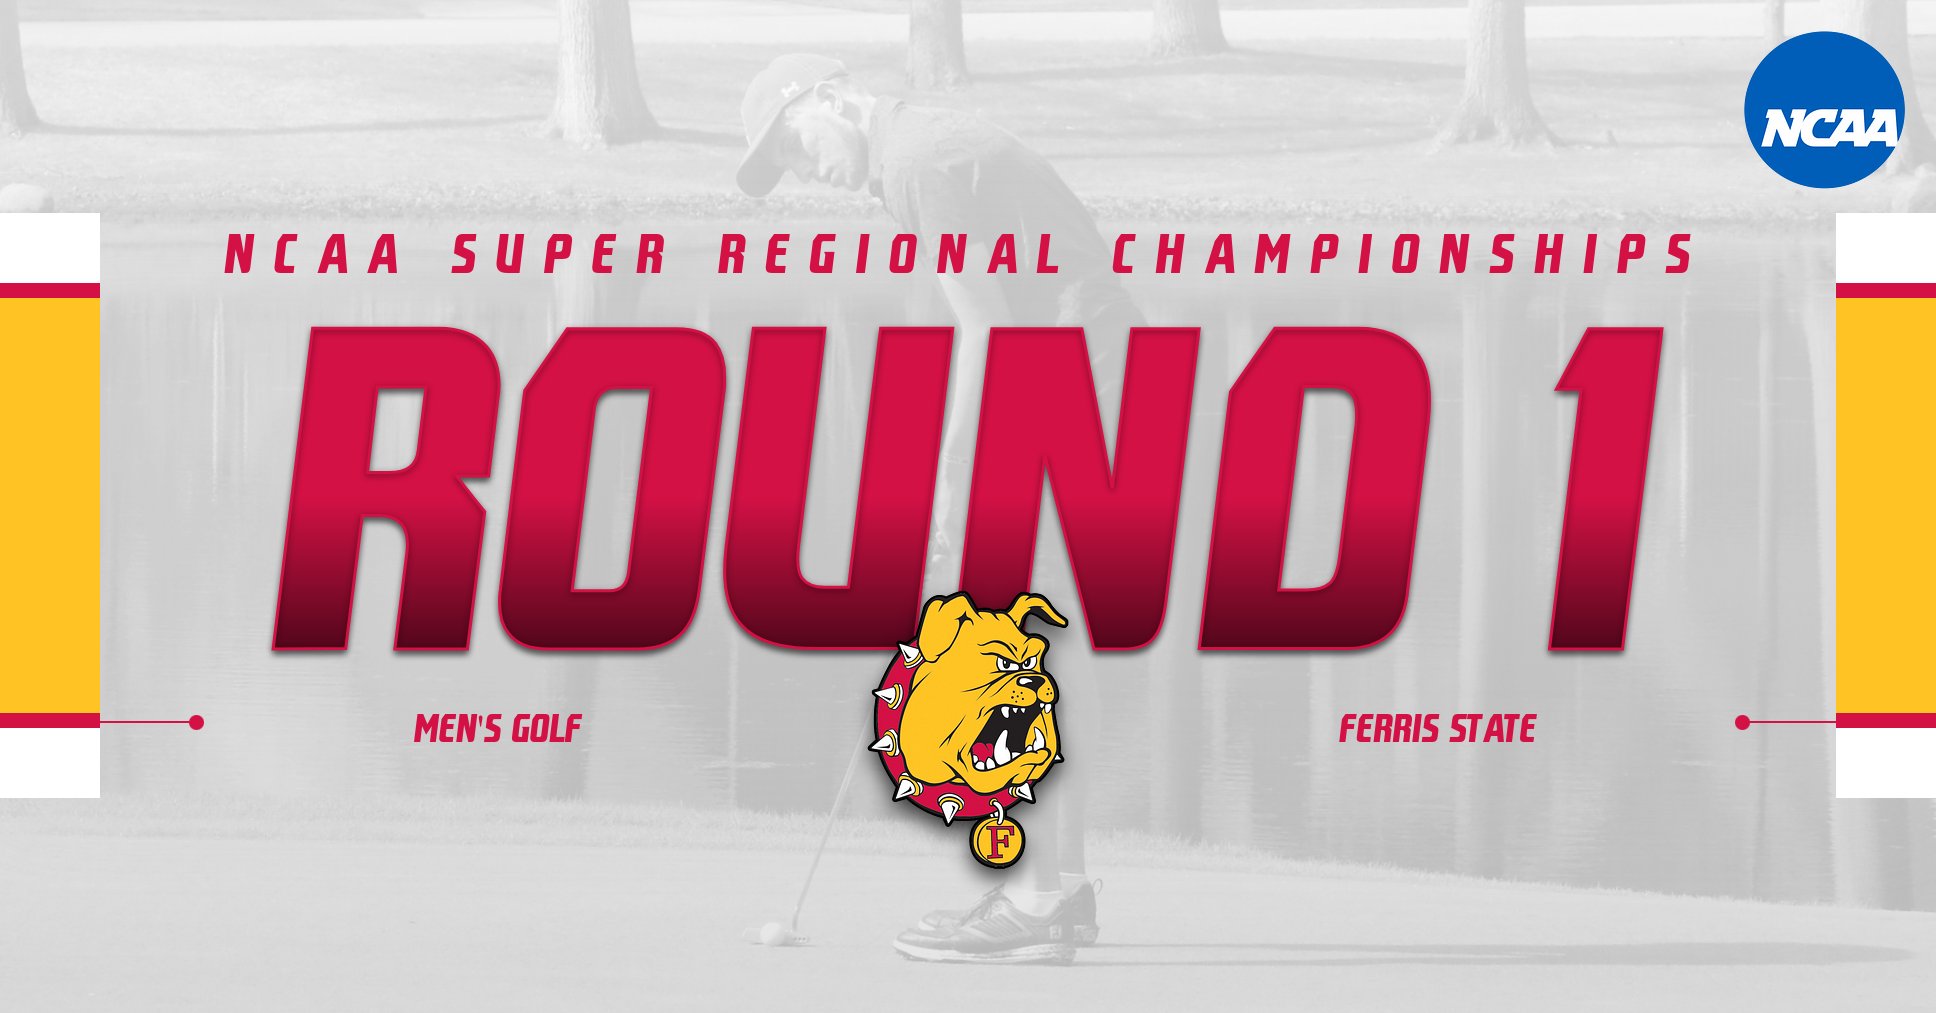 Ferris State Men's Golf Opens NCAA-II Super Regional Championships In 14th Place Overall